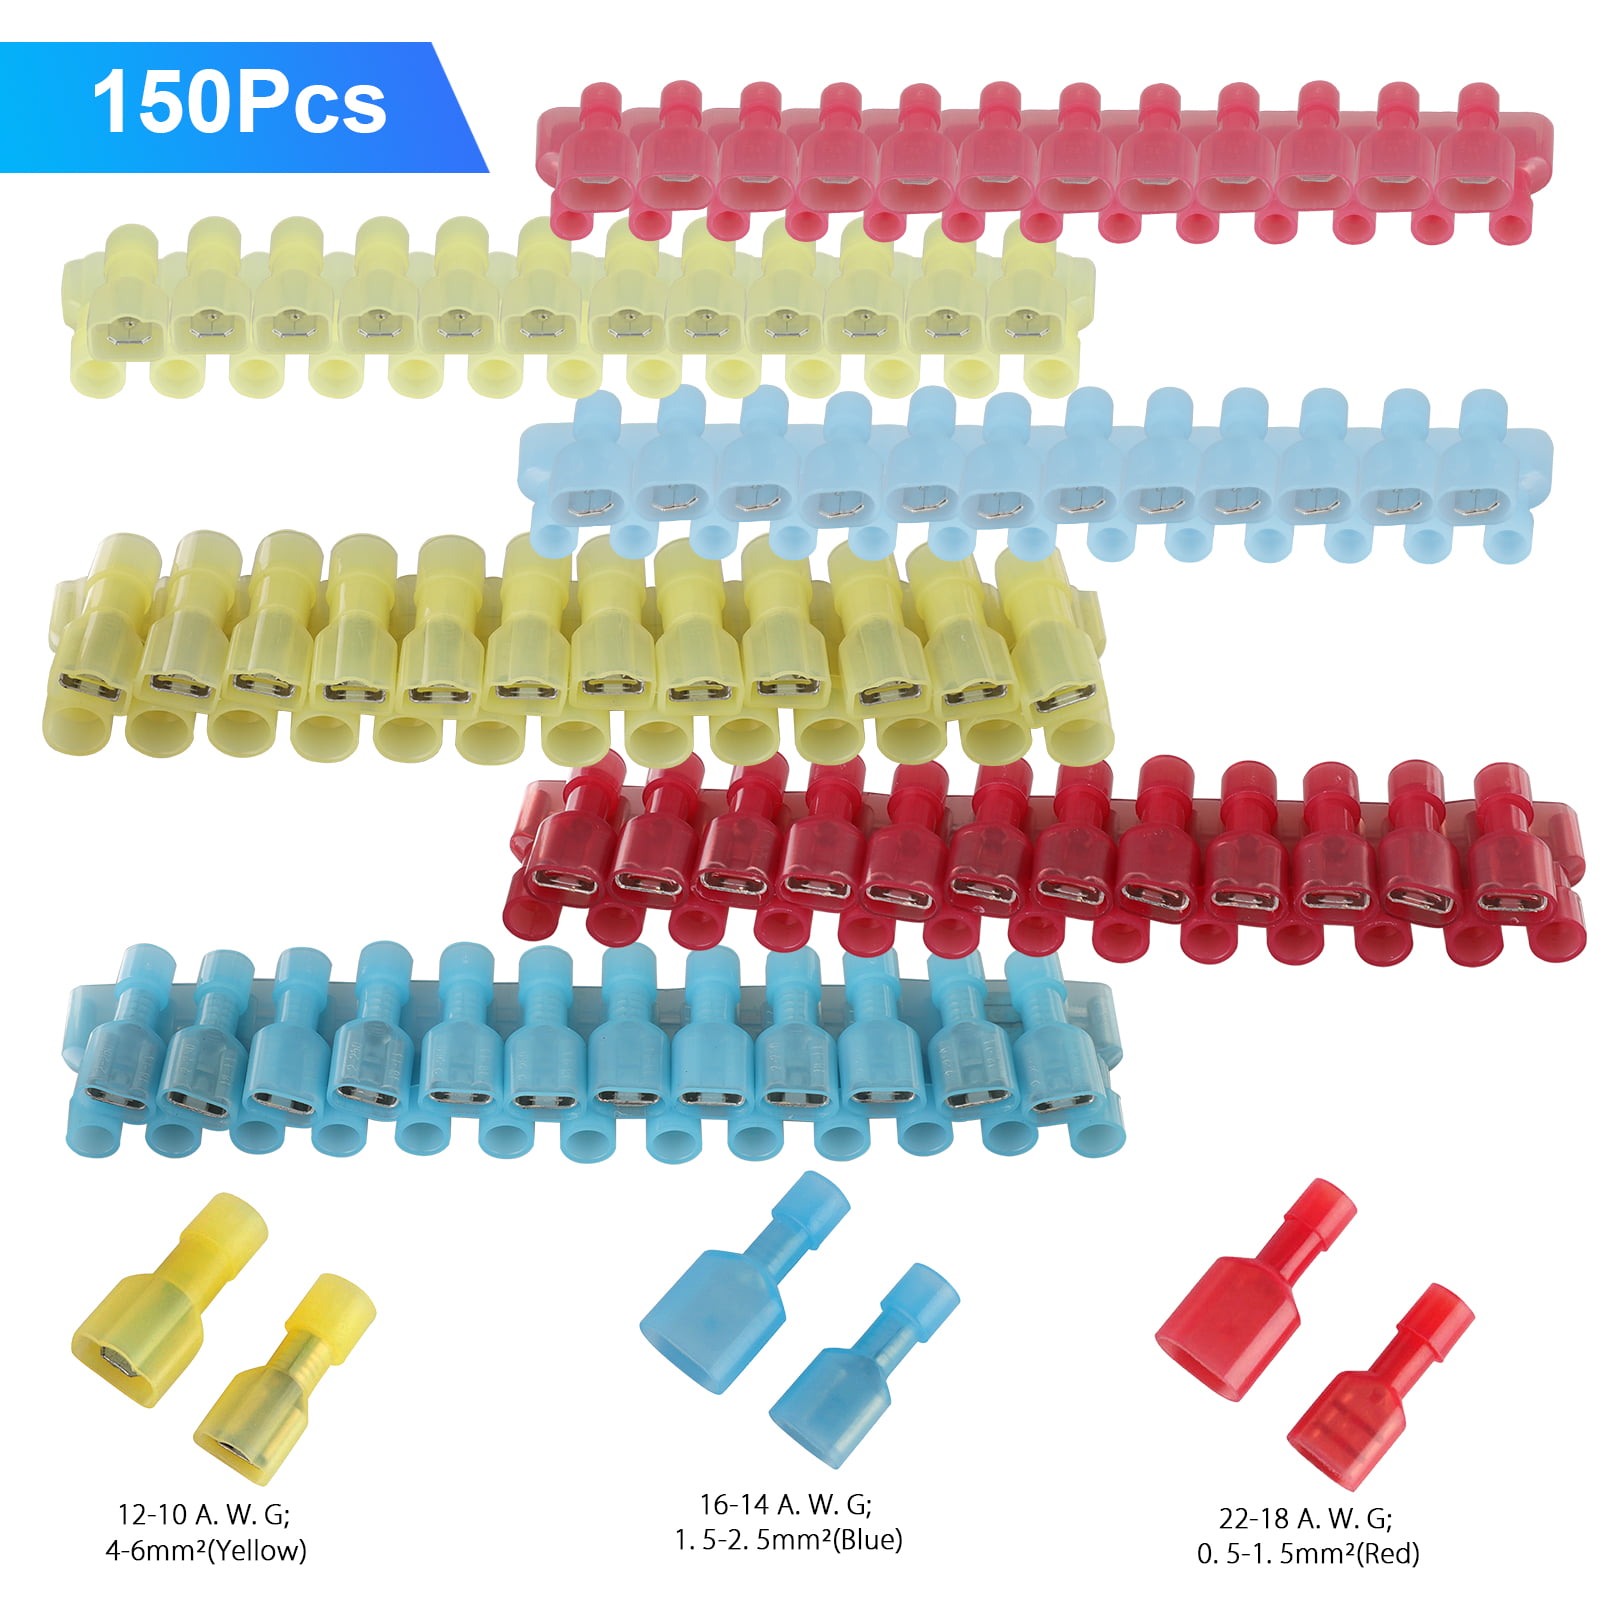 10-200x Fully Insulated Wire Spade Crimp Terminals Connectors Quick Disconnects